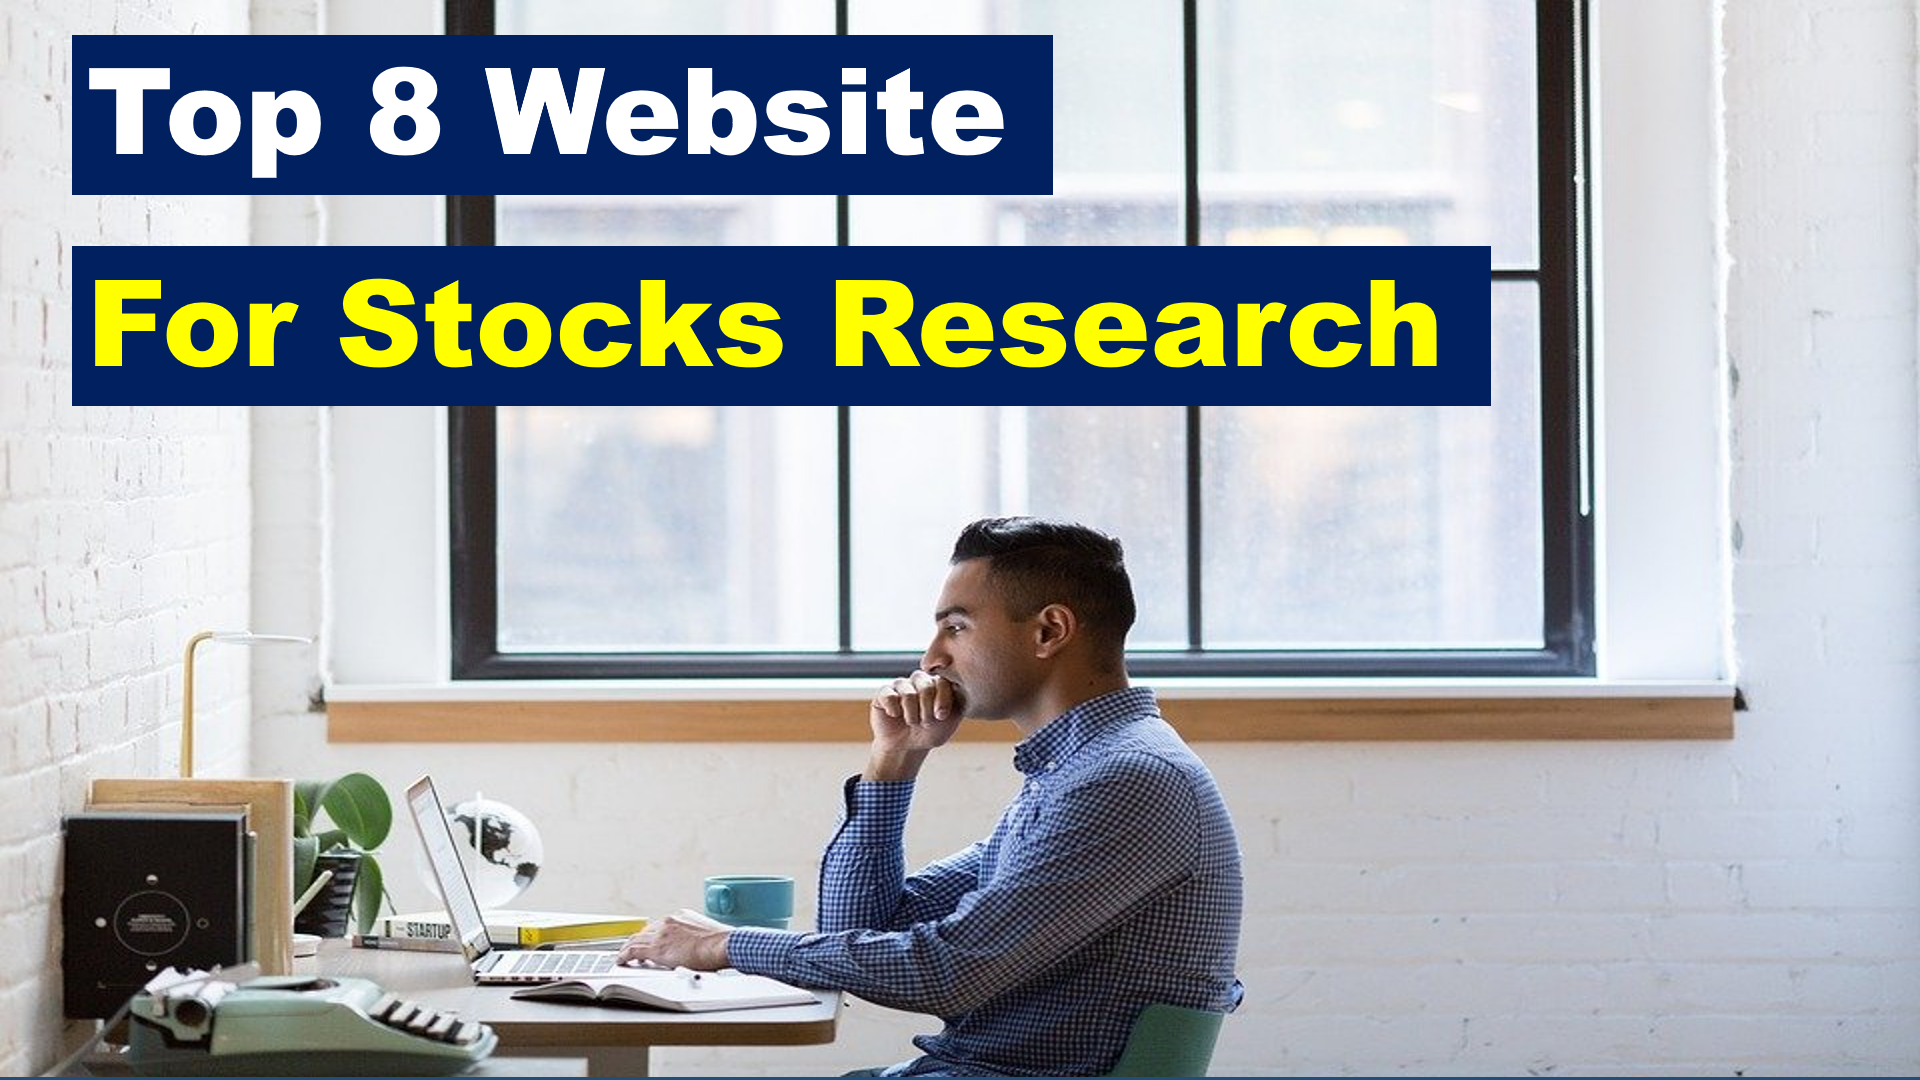 You are currently viewing List of 8 Stock Market Website in India